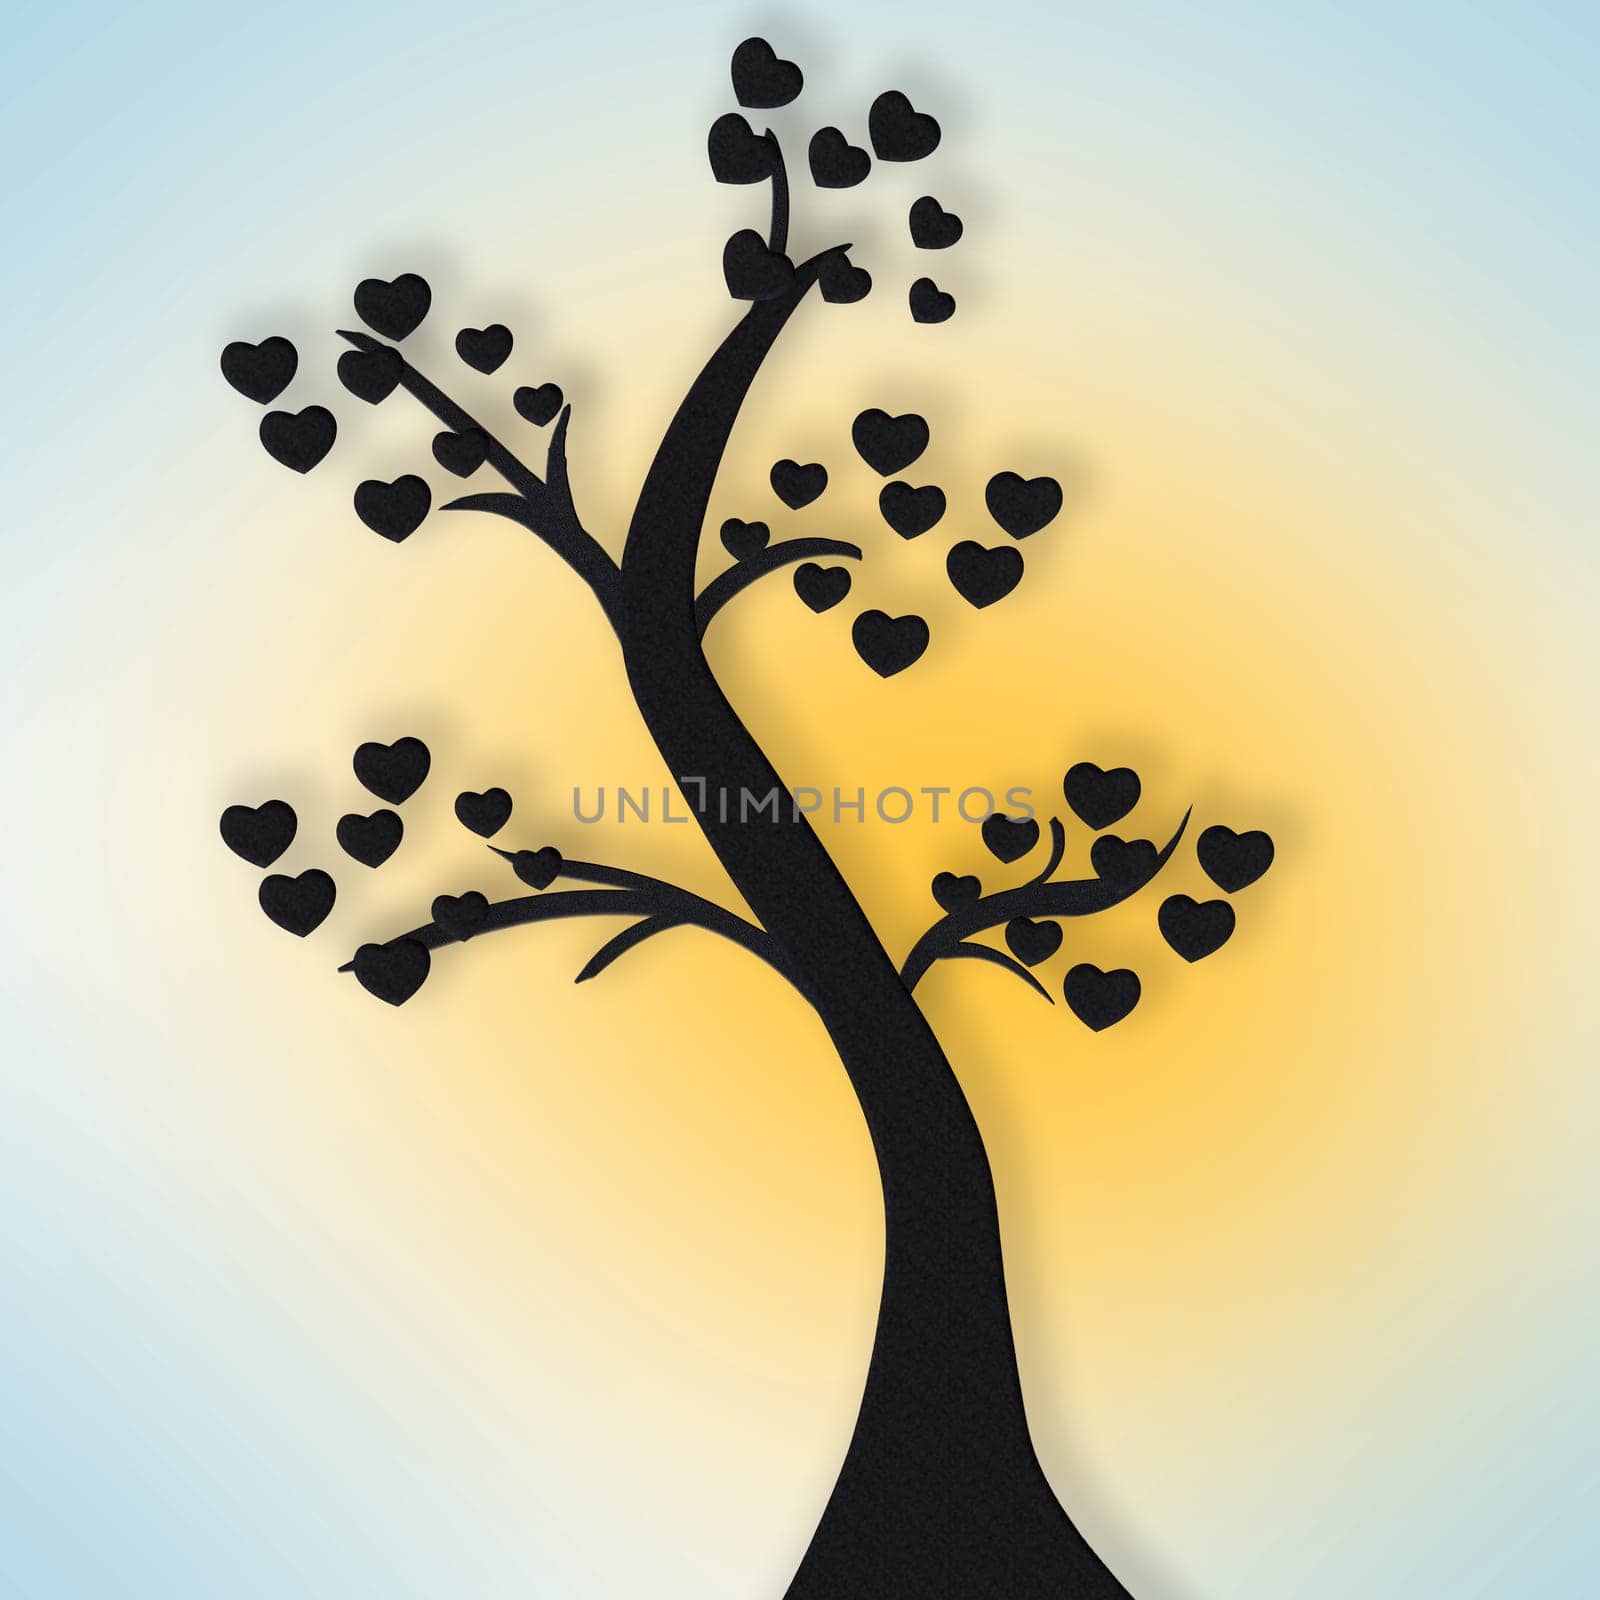 Cartoon, tree and graphic of hearts for love for support, valentines day and mockup space in studio. Blue background, icons or illustration of a creative wallpaper for care, nature design or romance.